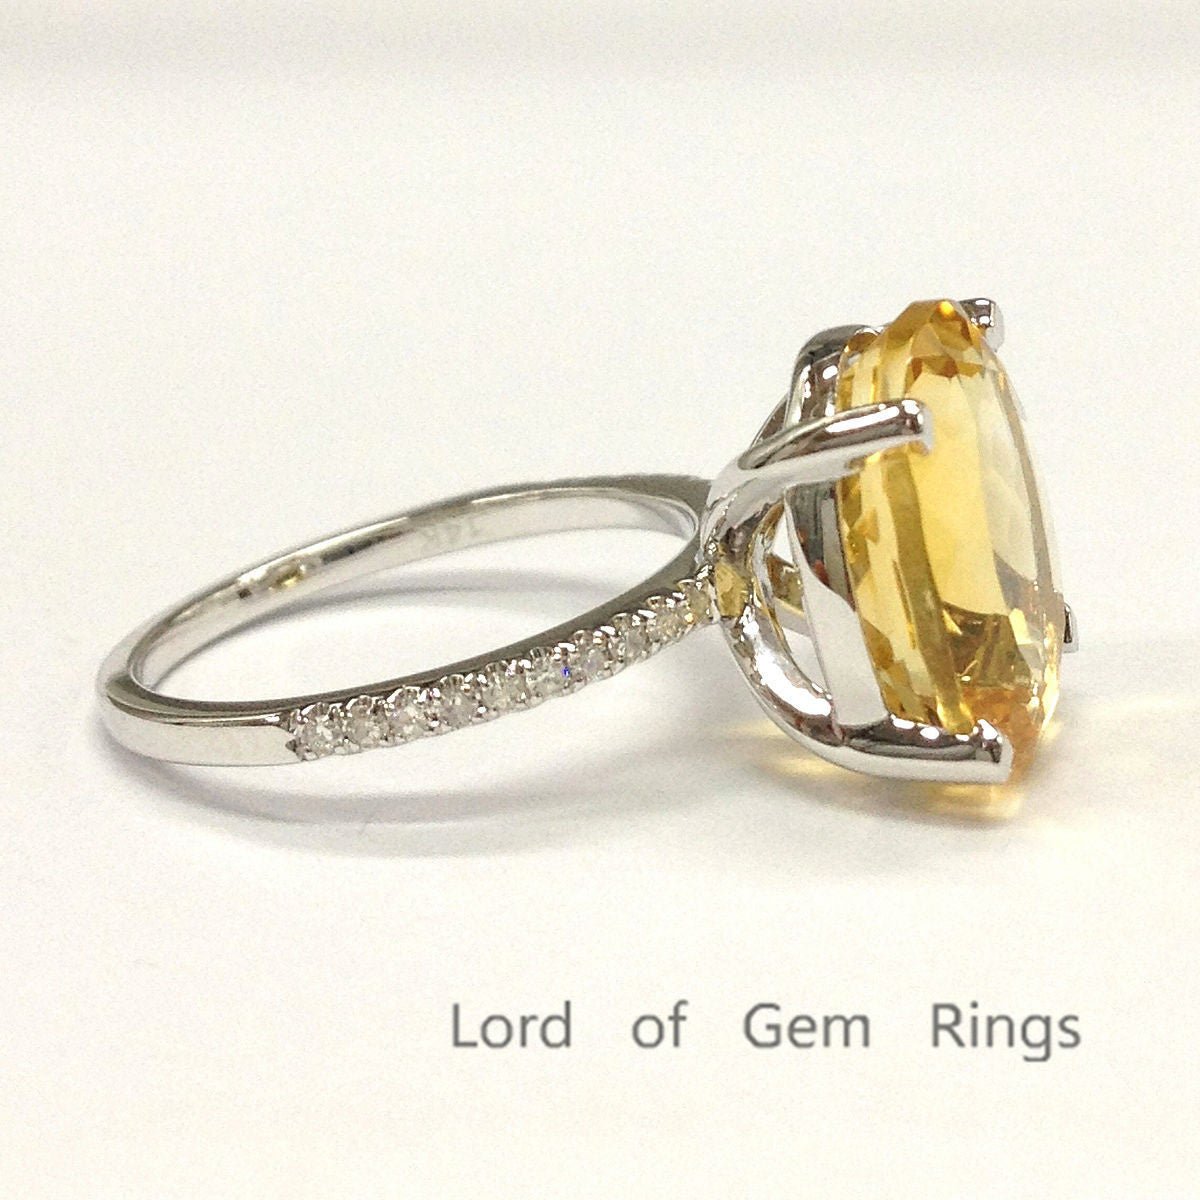 5ct Oval Citrine Diamond Accents Engagement Ring - Lord of Gem Rings